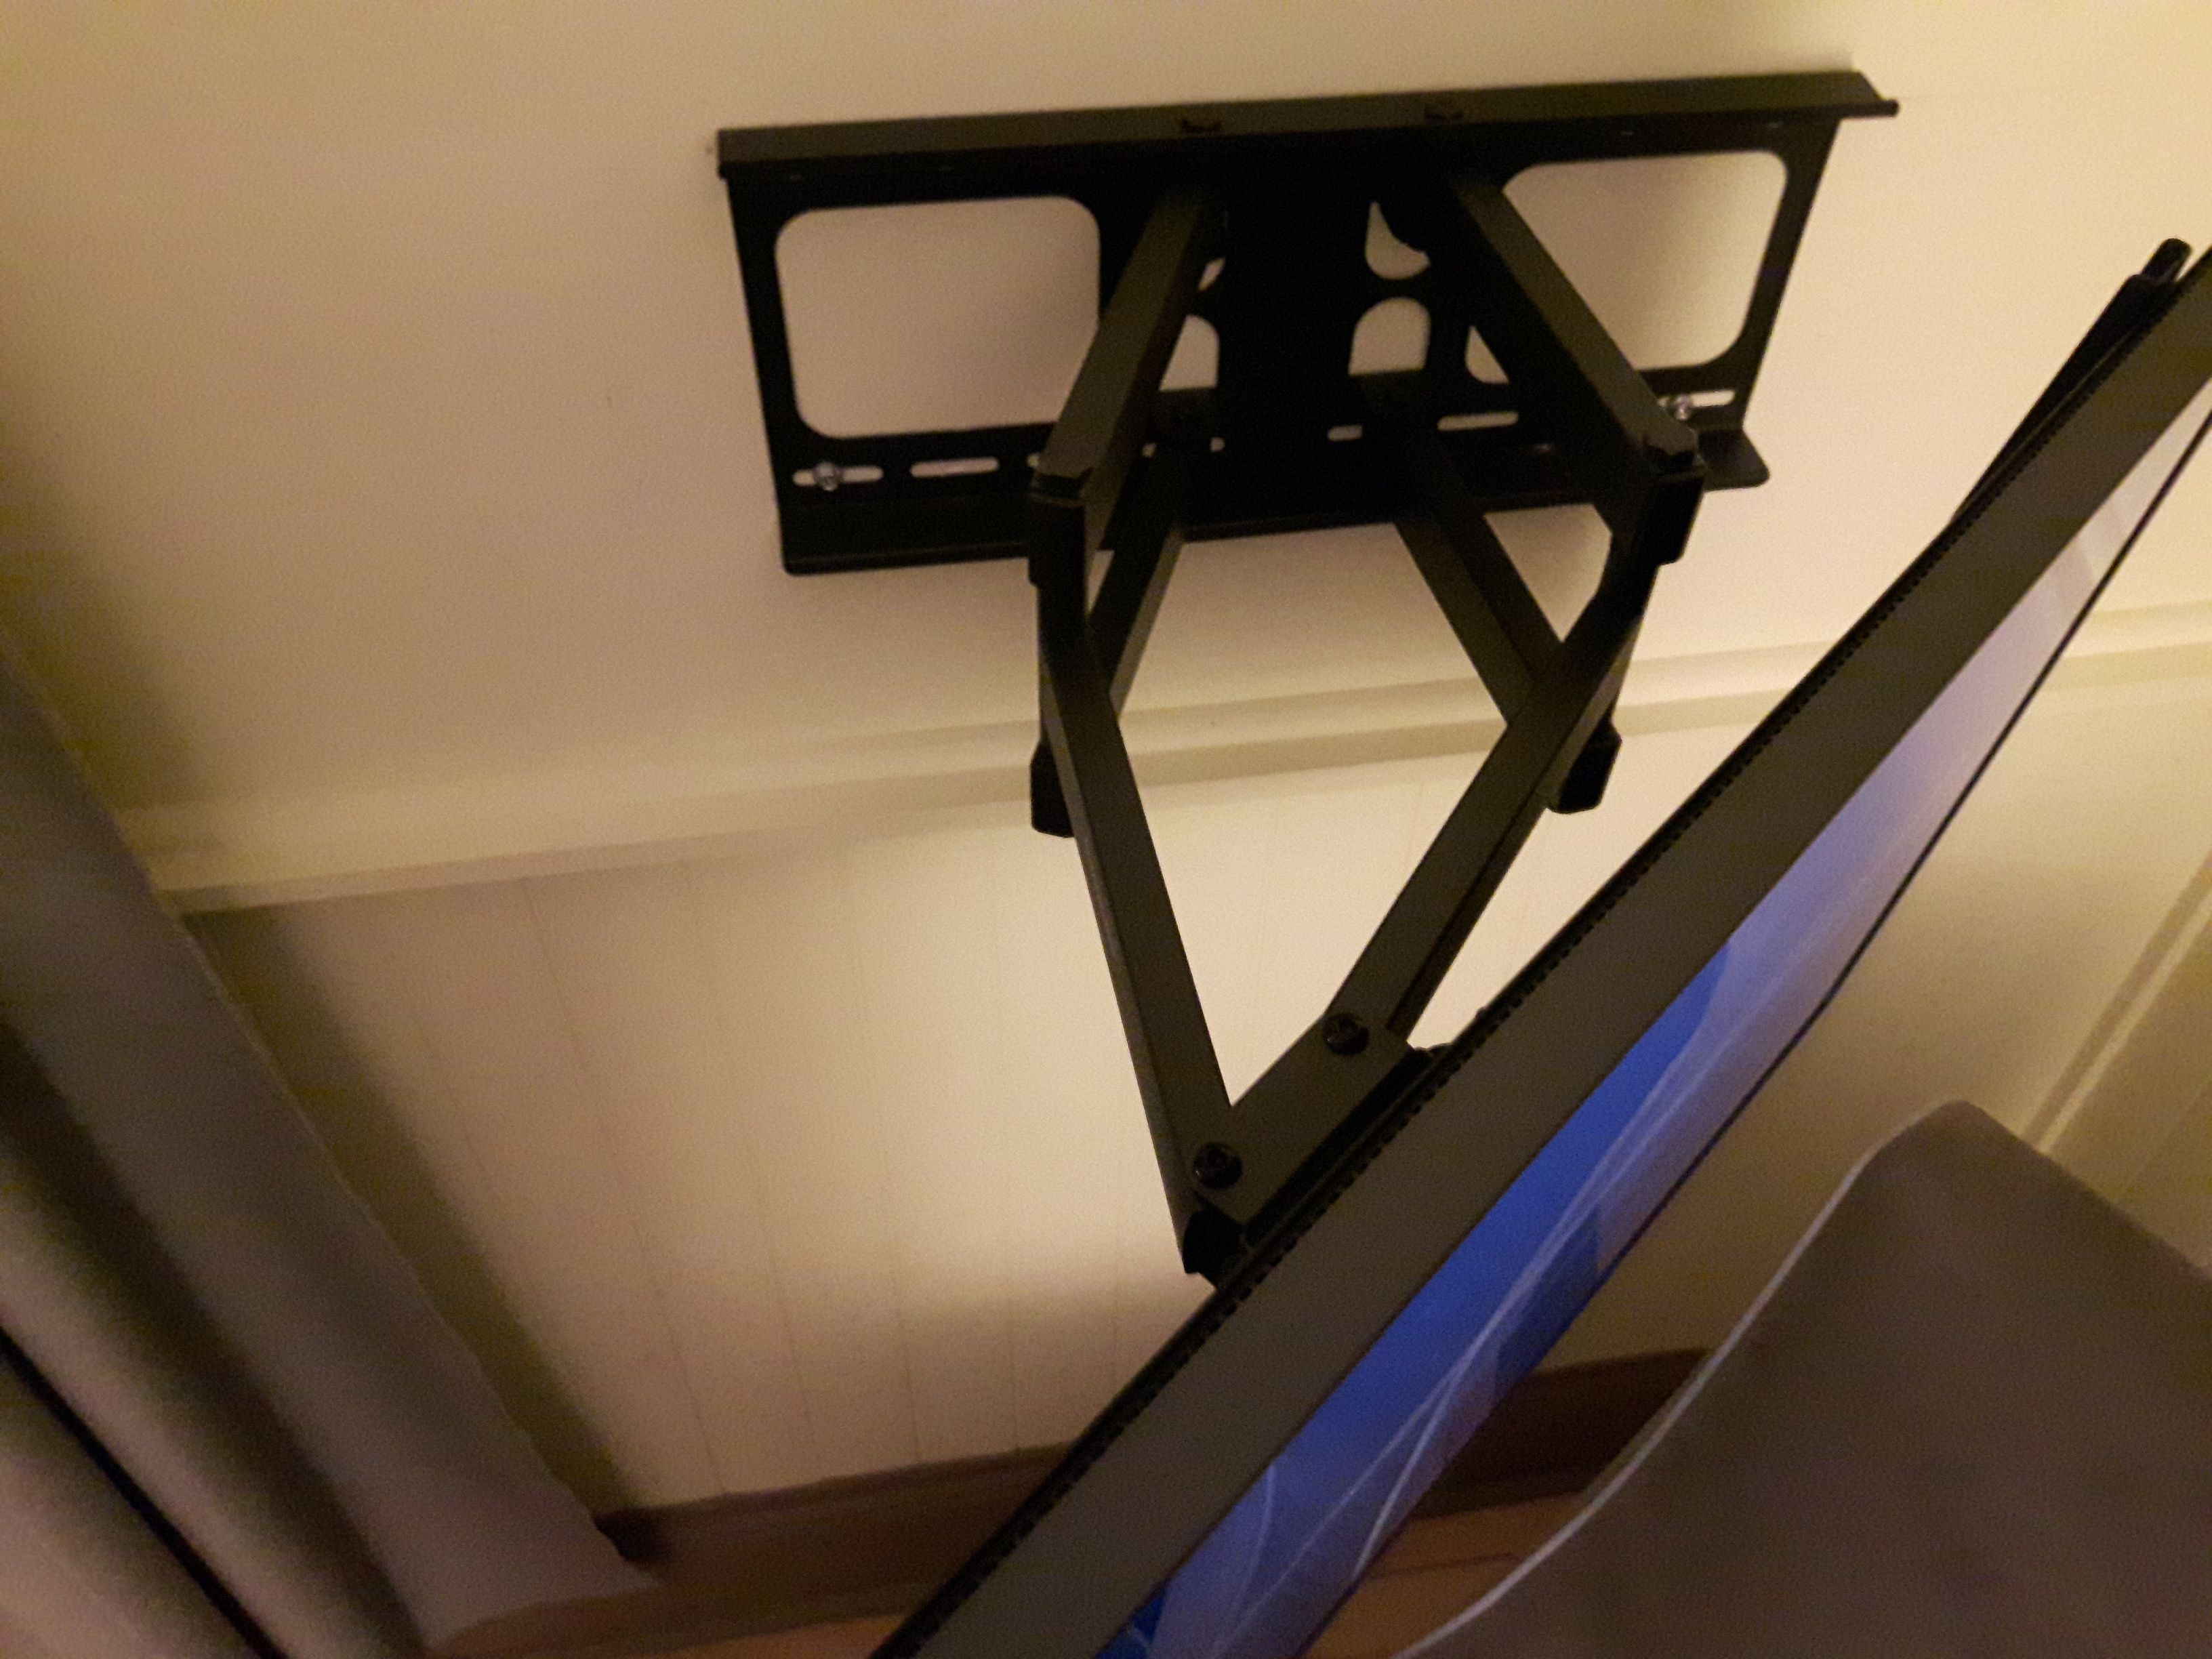 The Frame 32” 2020 tilting/twisting Wall Mount Solution - Samsung Community